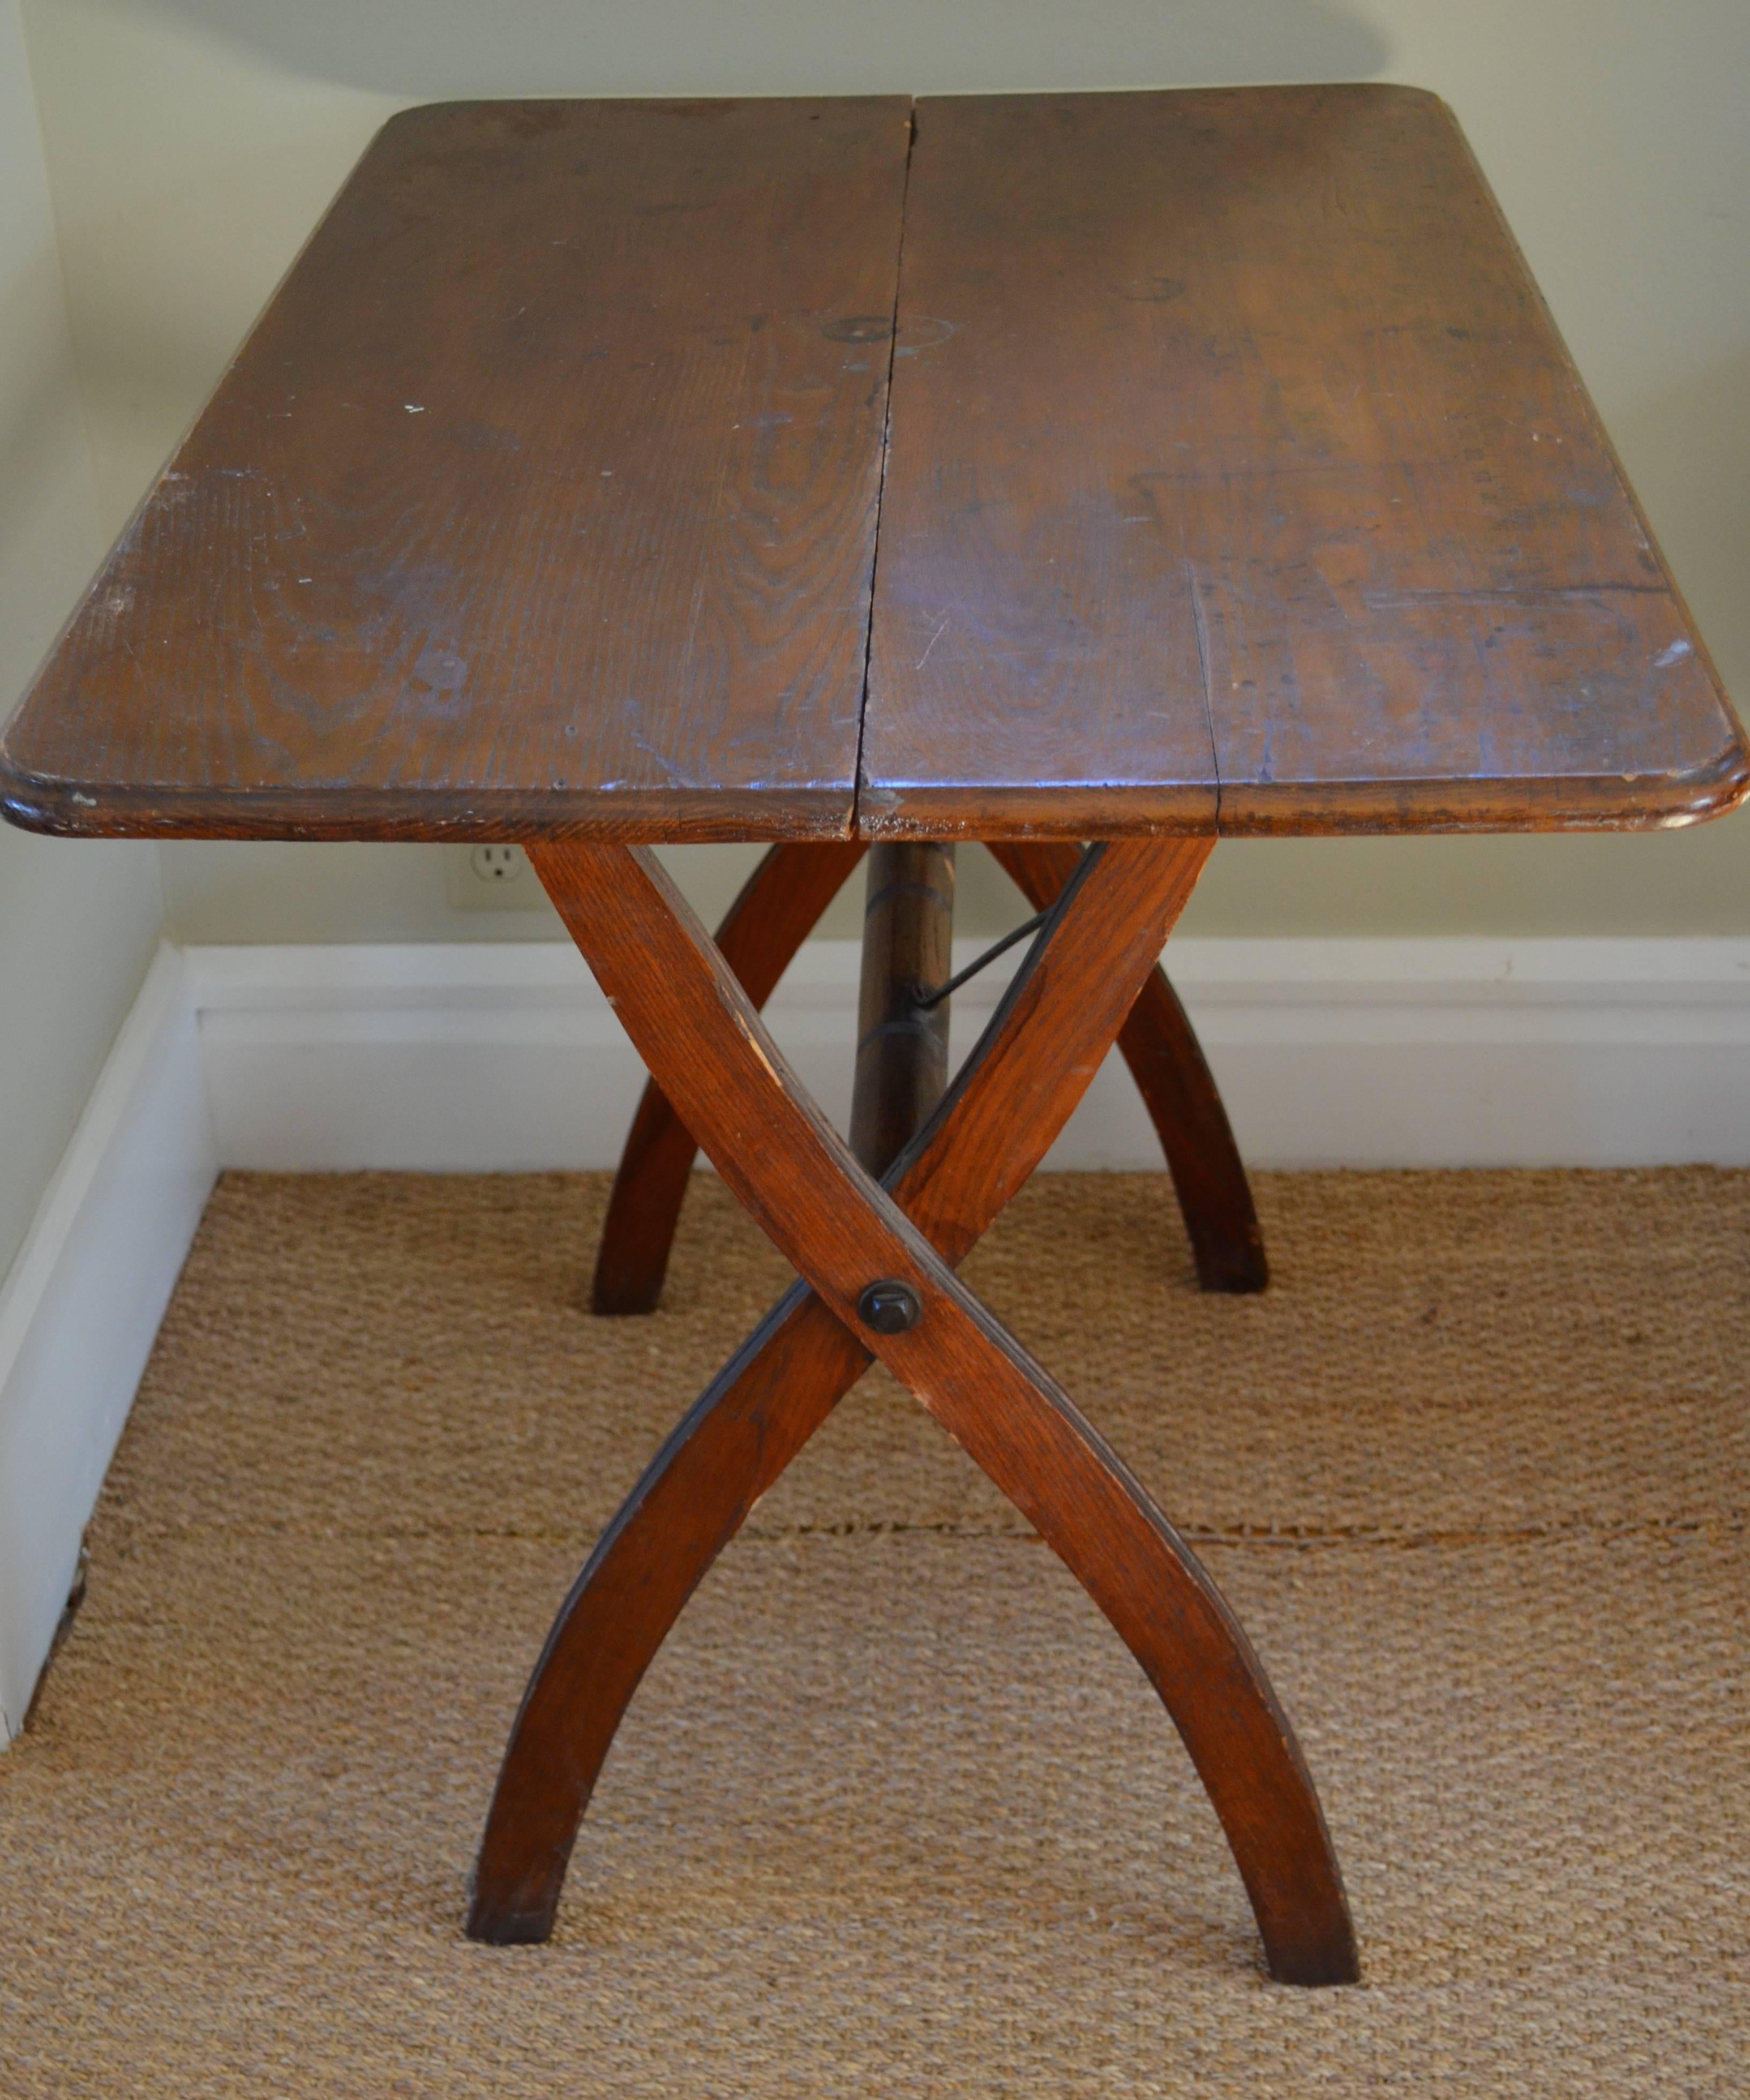 American Craftsman Wooden Sewing/Folding Table, Early 1900s